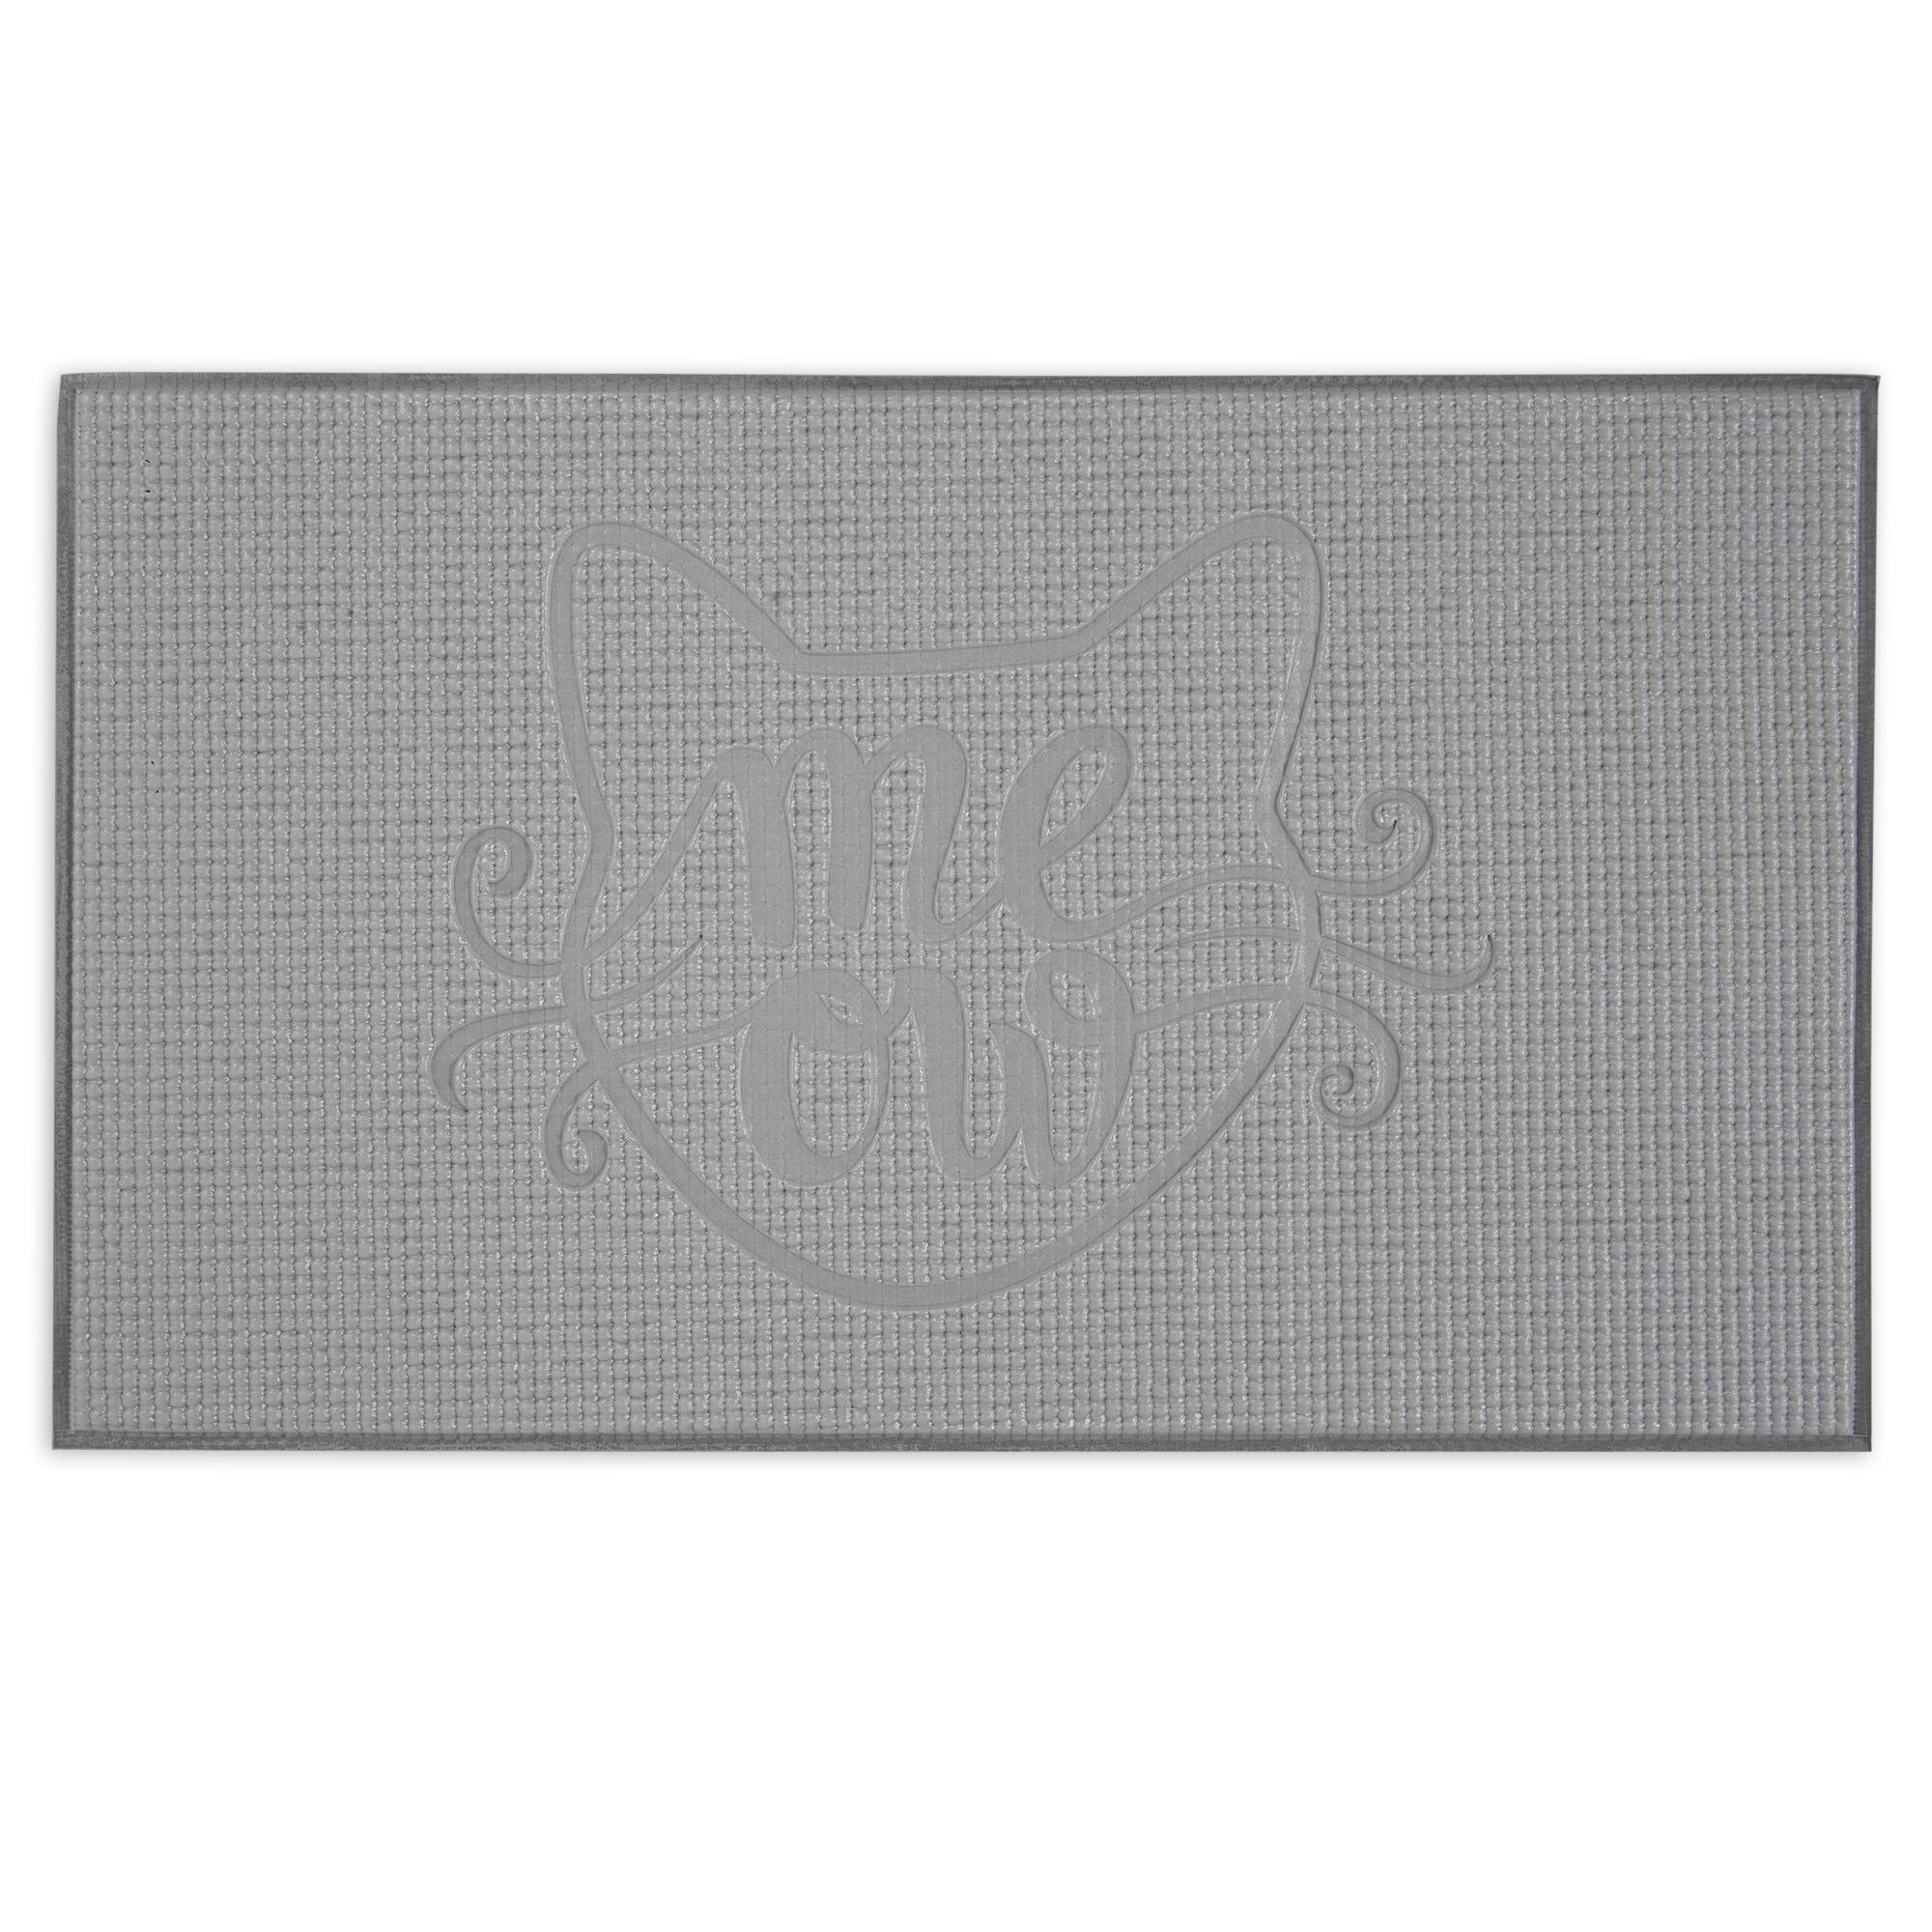 Aspen Pet Foam Pet Bowl Mat for Cats, 19 inches x 11.5 inches - image 1 of 7